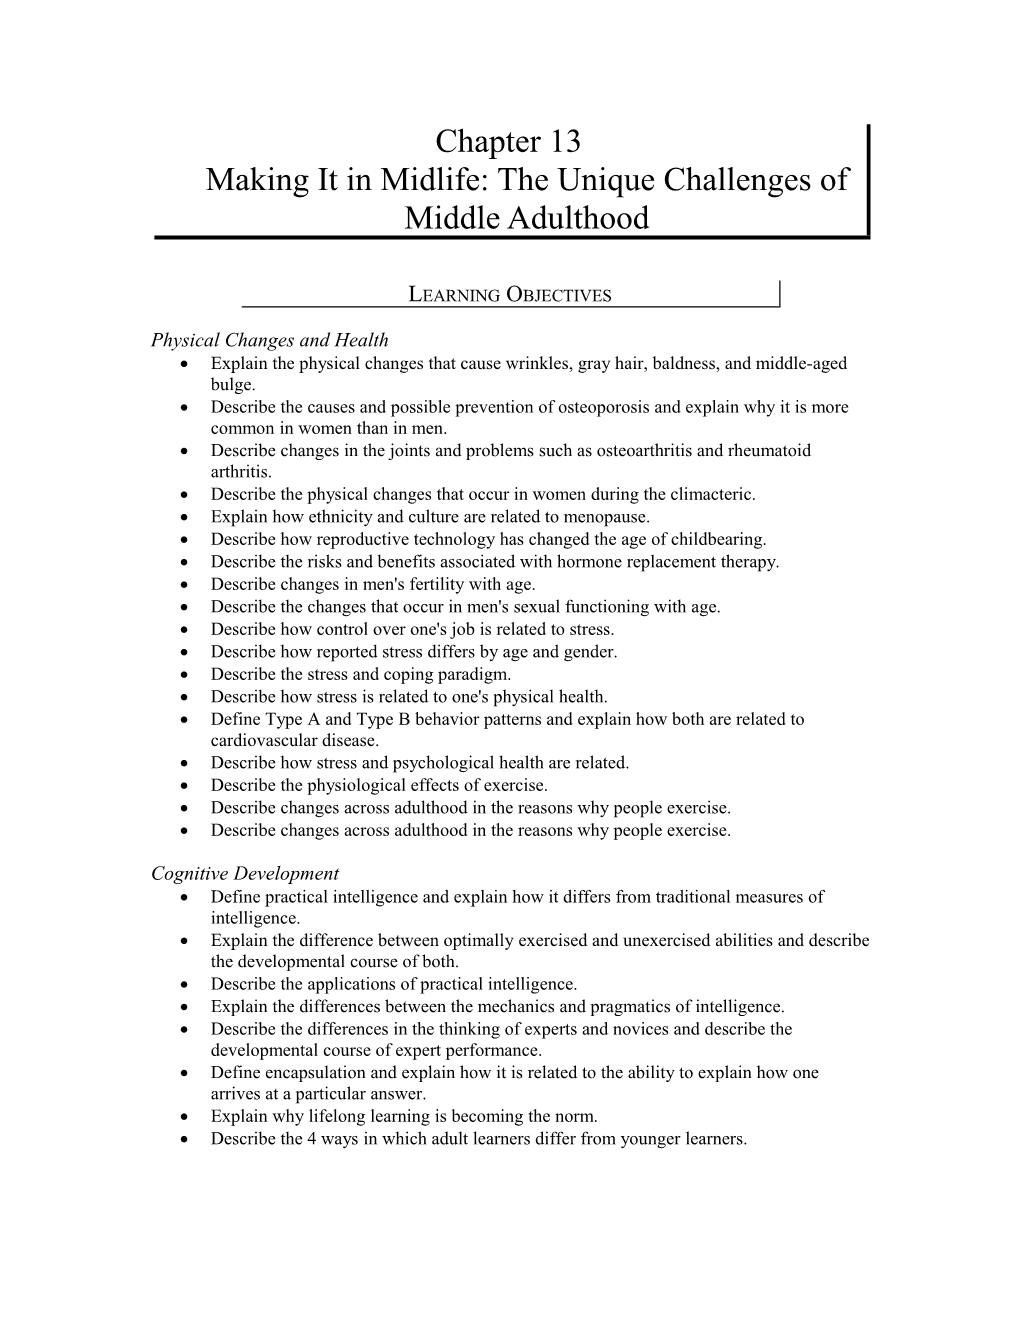 Chapter 13Making It in Midlife: the Unique Challenges of Middle Adulthood